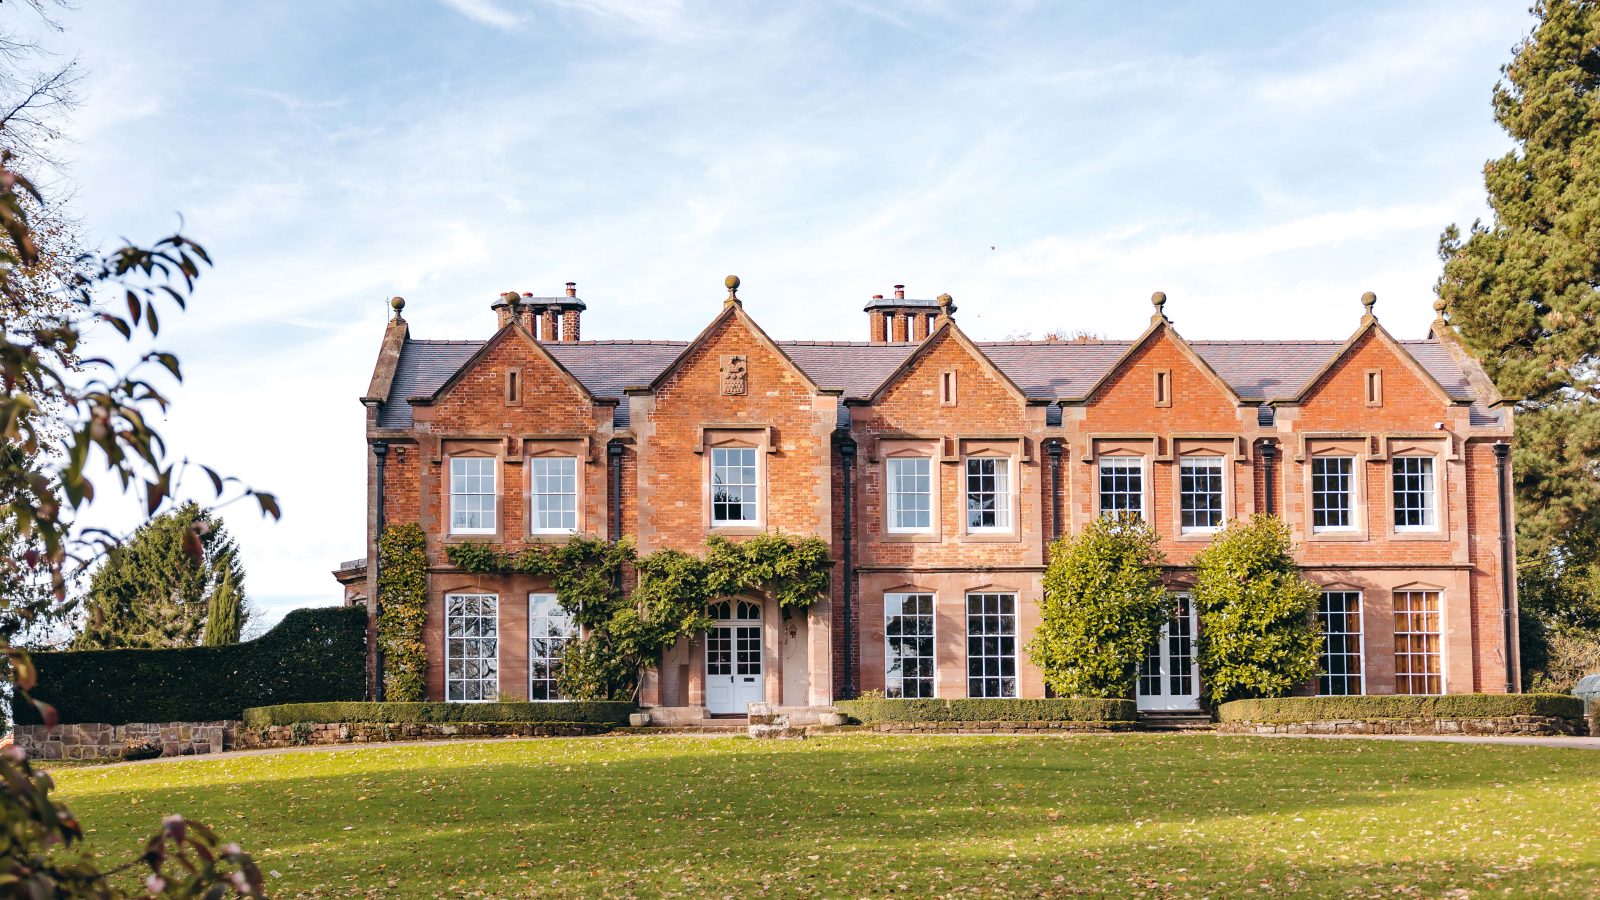 Masefield House - kate & tom's Large Holiday Homes